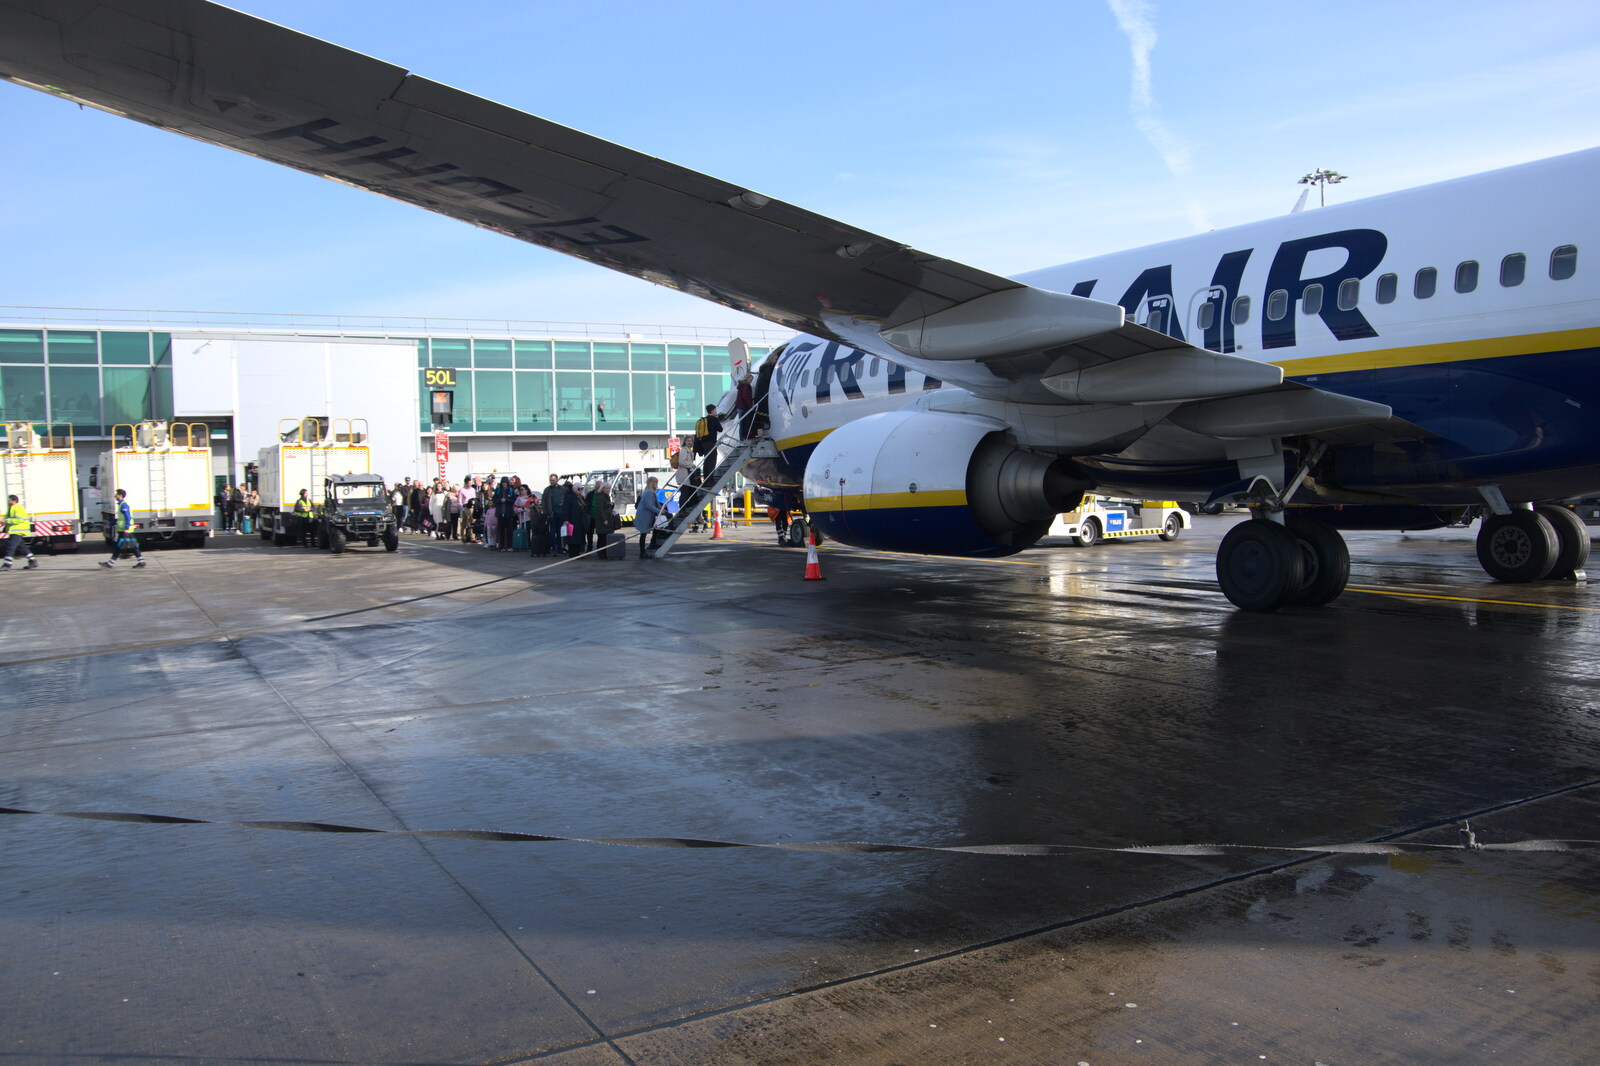 Blackrock North and Newgrange, County Louth, Ireland - 16th February 2023: The queue for the plane